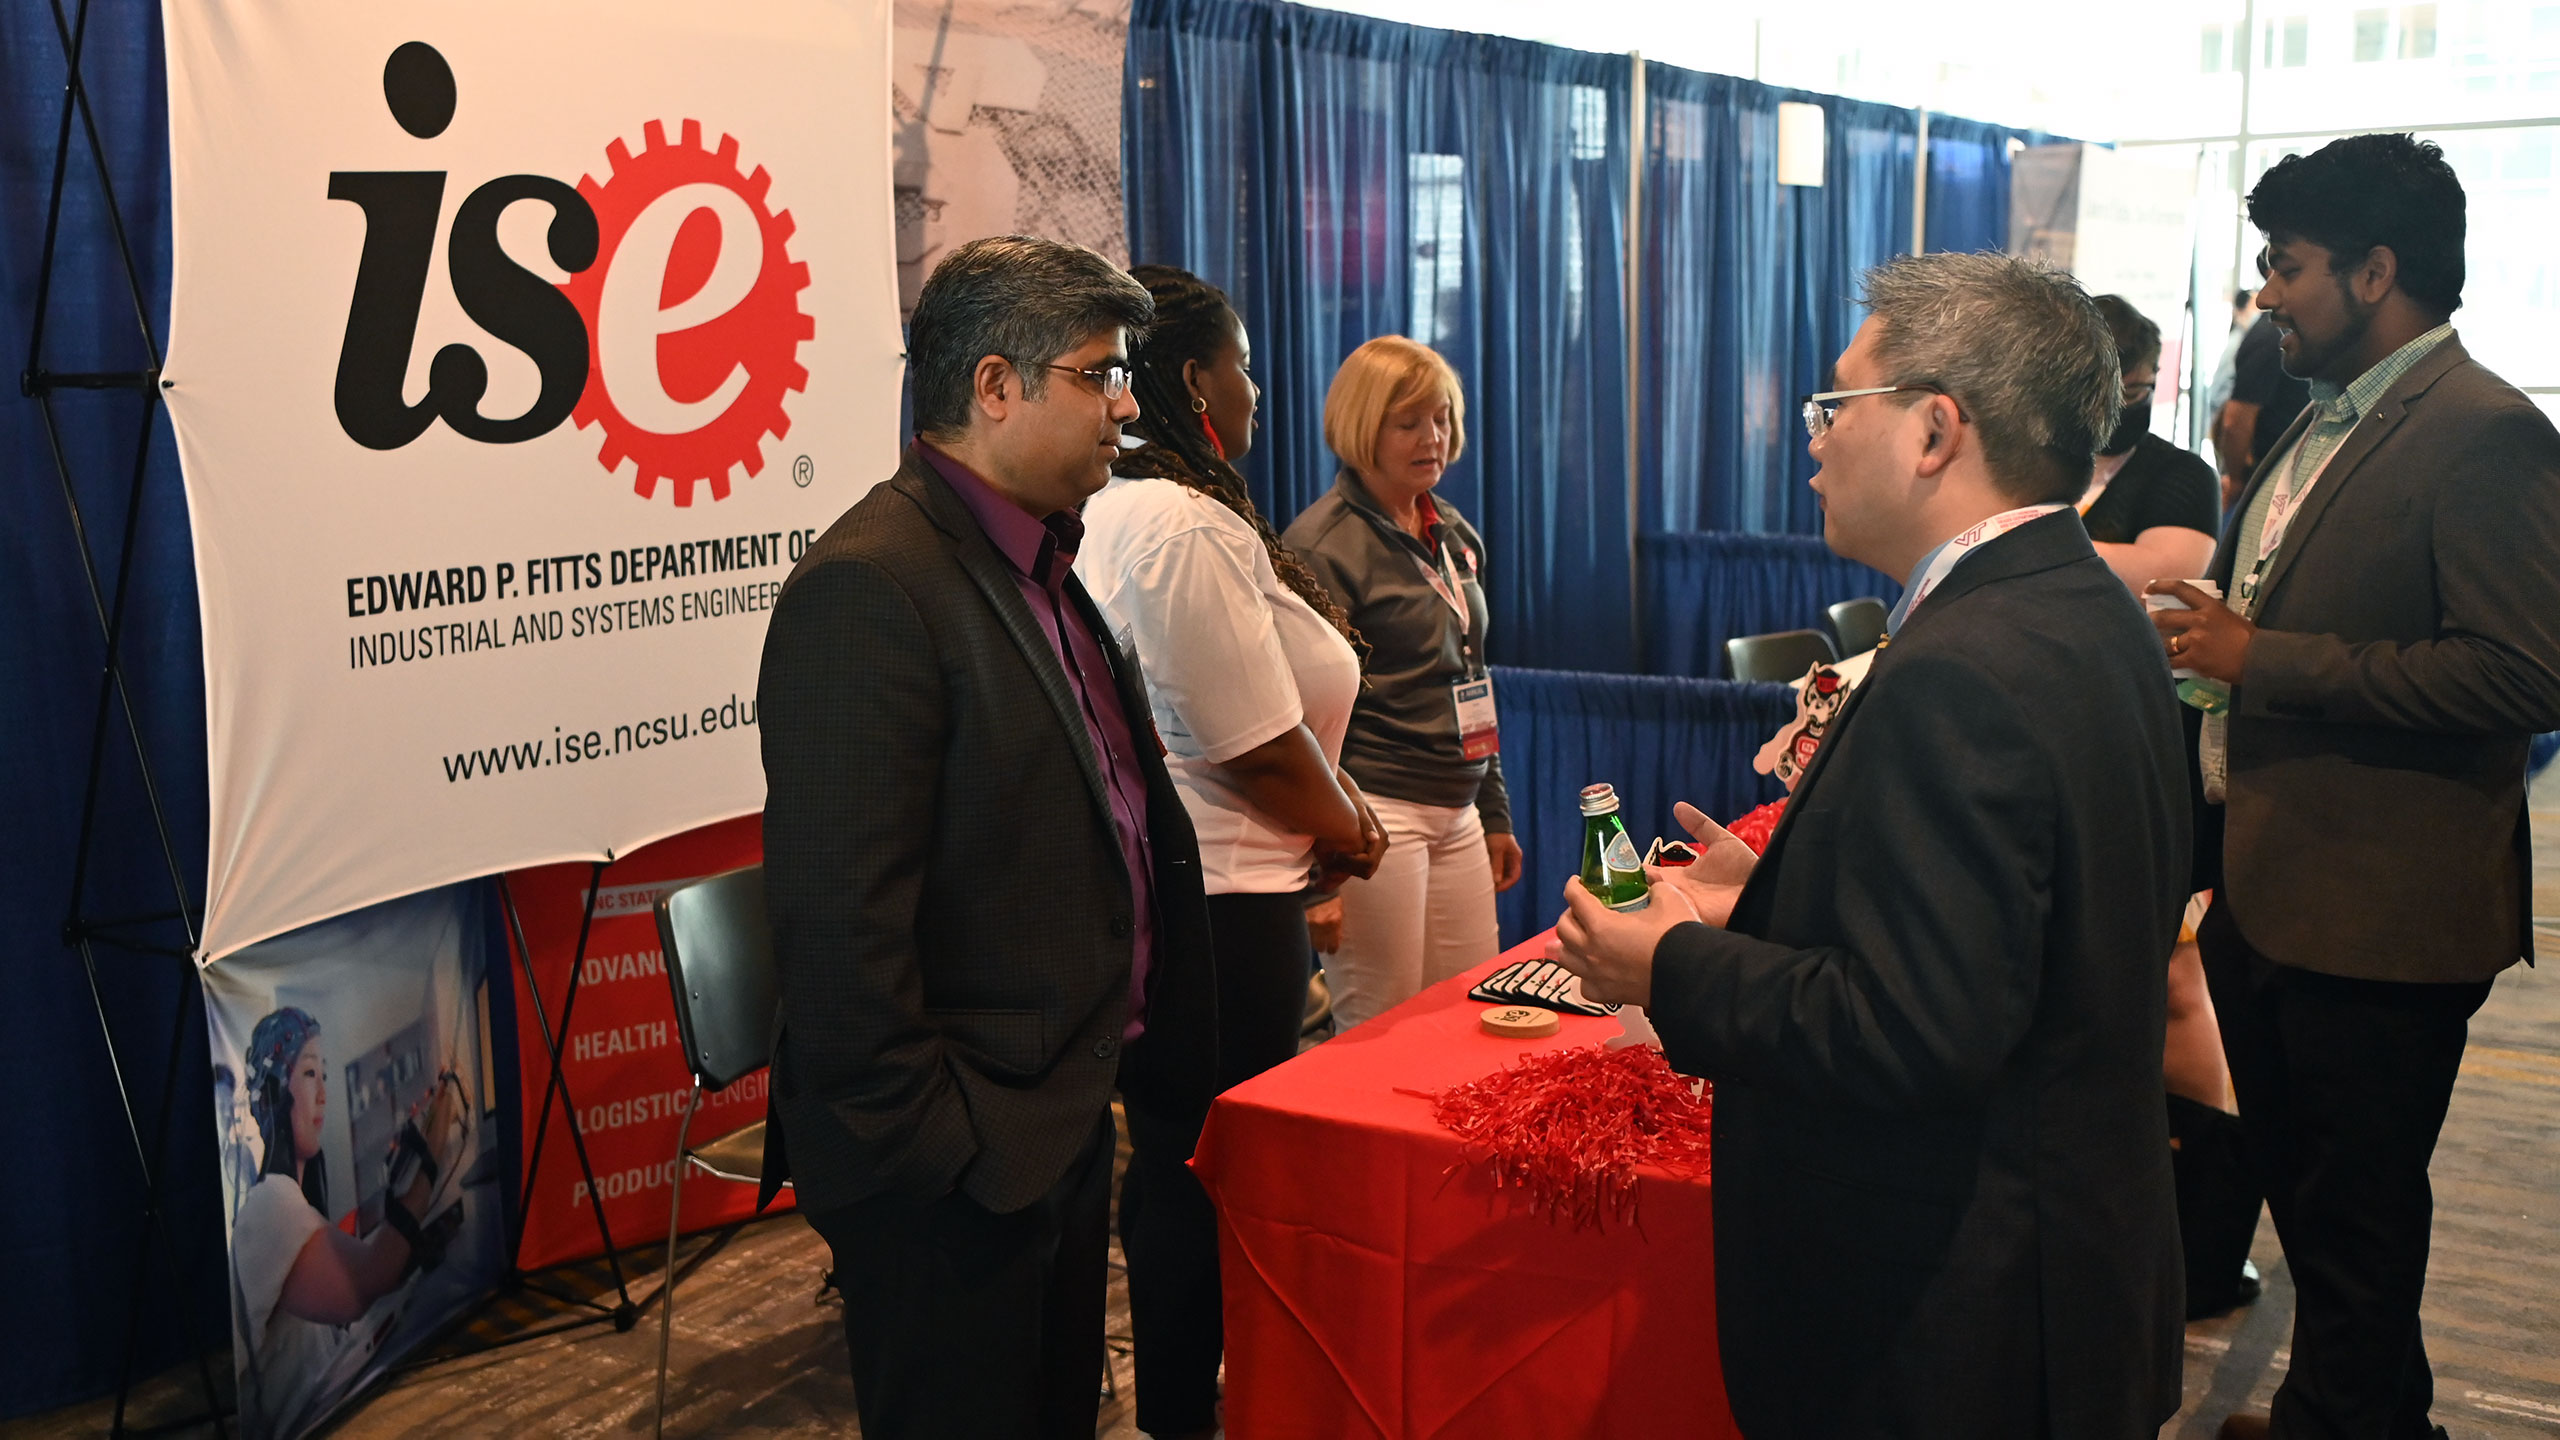 Rohan Shirwaiker talks with colleagues at the ISE conference booth